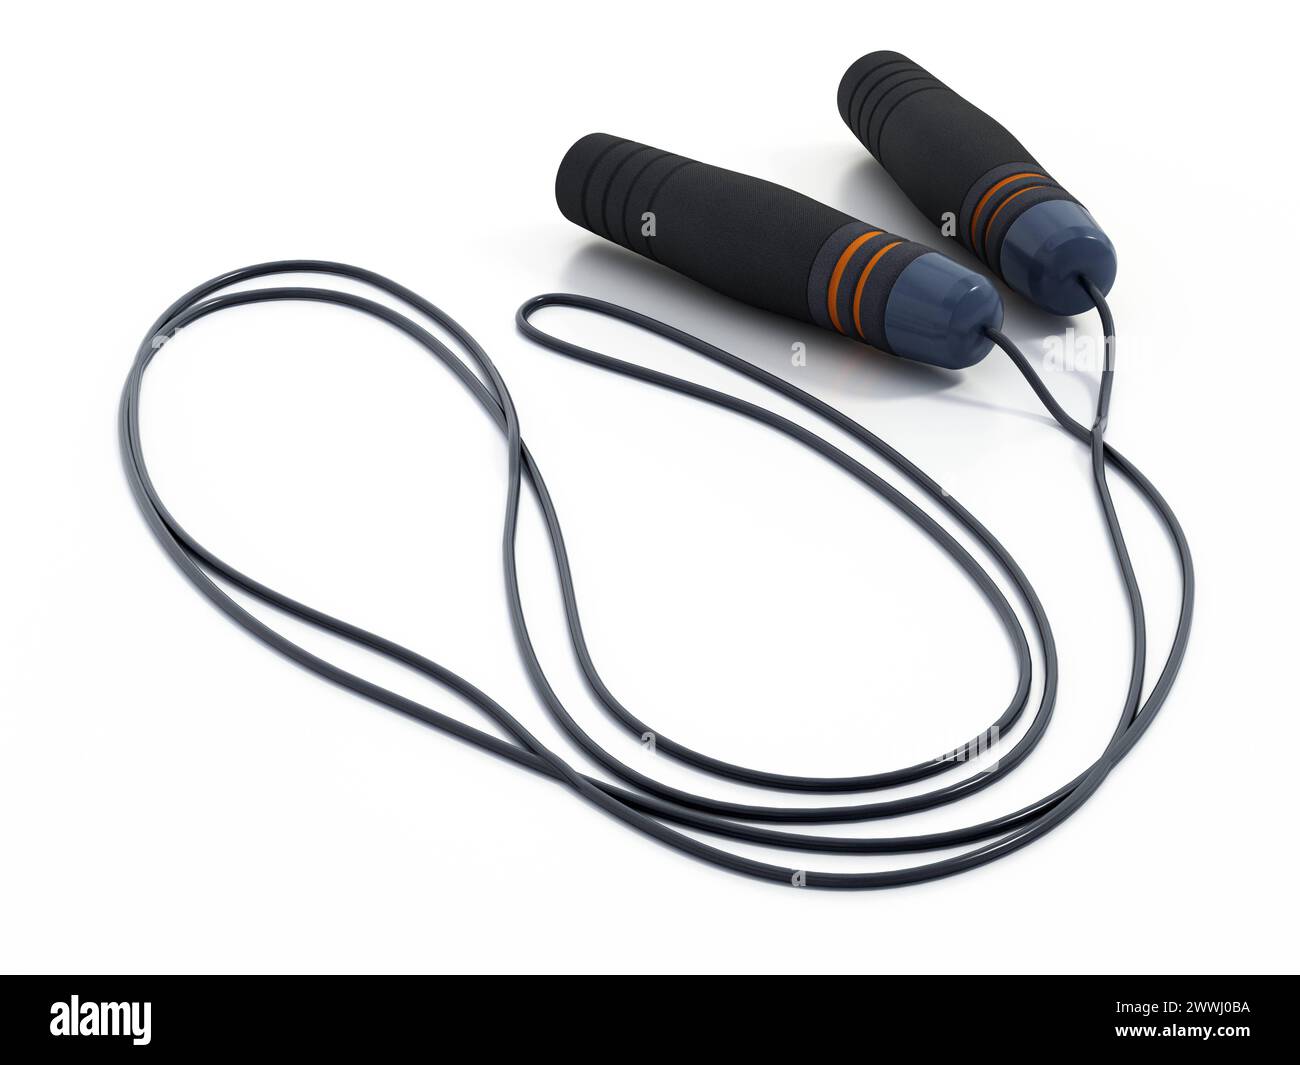 Professional jump rope isolated on white background. 3D illustration Professional jump rope isolated on white background Professional jump rope isolat Stock Photo